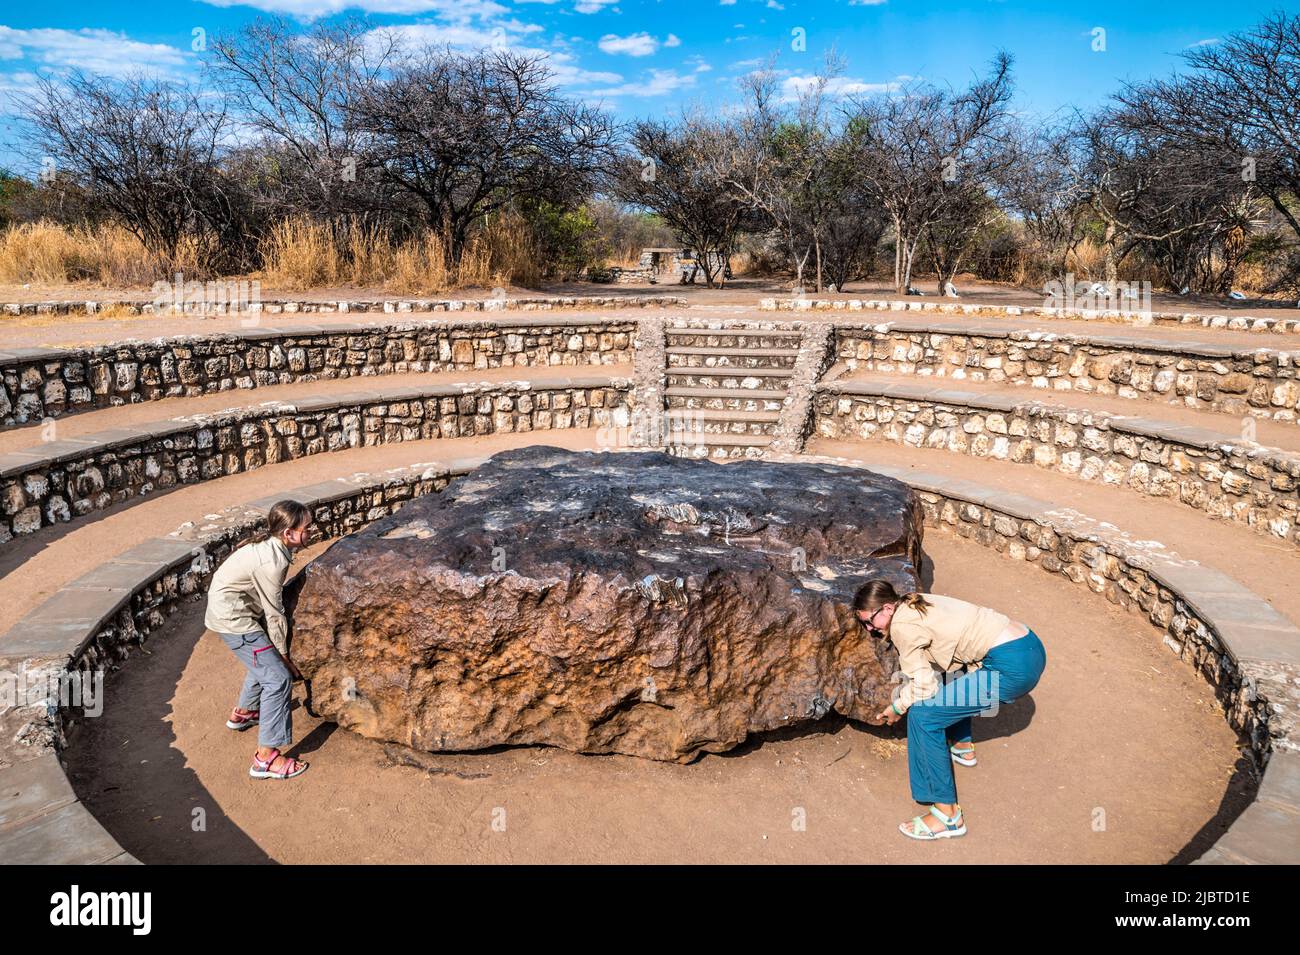 Namibia, Otjozondjupa region, Grootfontein, The Hoba meteorite, located on the Hoba West farm, discovered in 1920 by Jacobus BRITS, is the largest known meteorite (60 tons in one piece, 2.7 m long by as wide and 0.9 m high) and the largest known natural block of iron on the surface of the Earth, the fall of the meteorite is estimated to have taken place less than 80,000 years ago Stock Photo